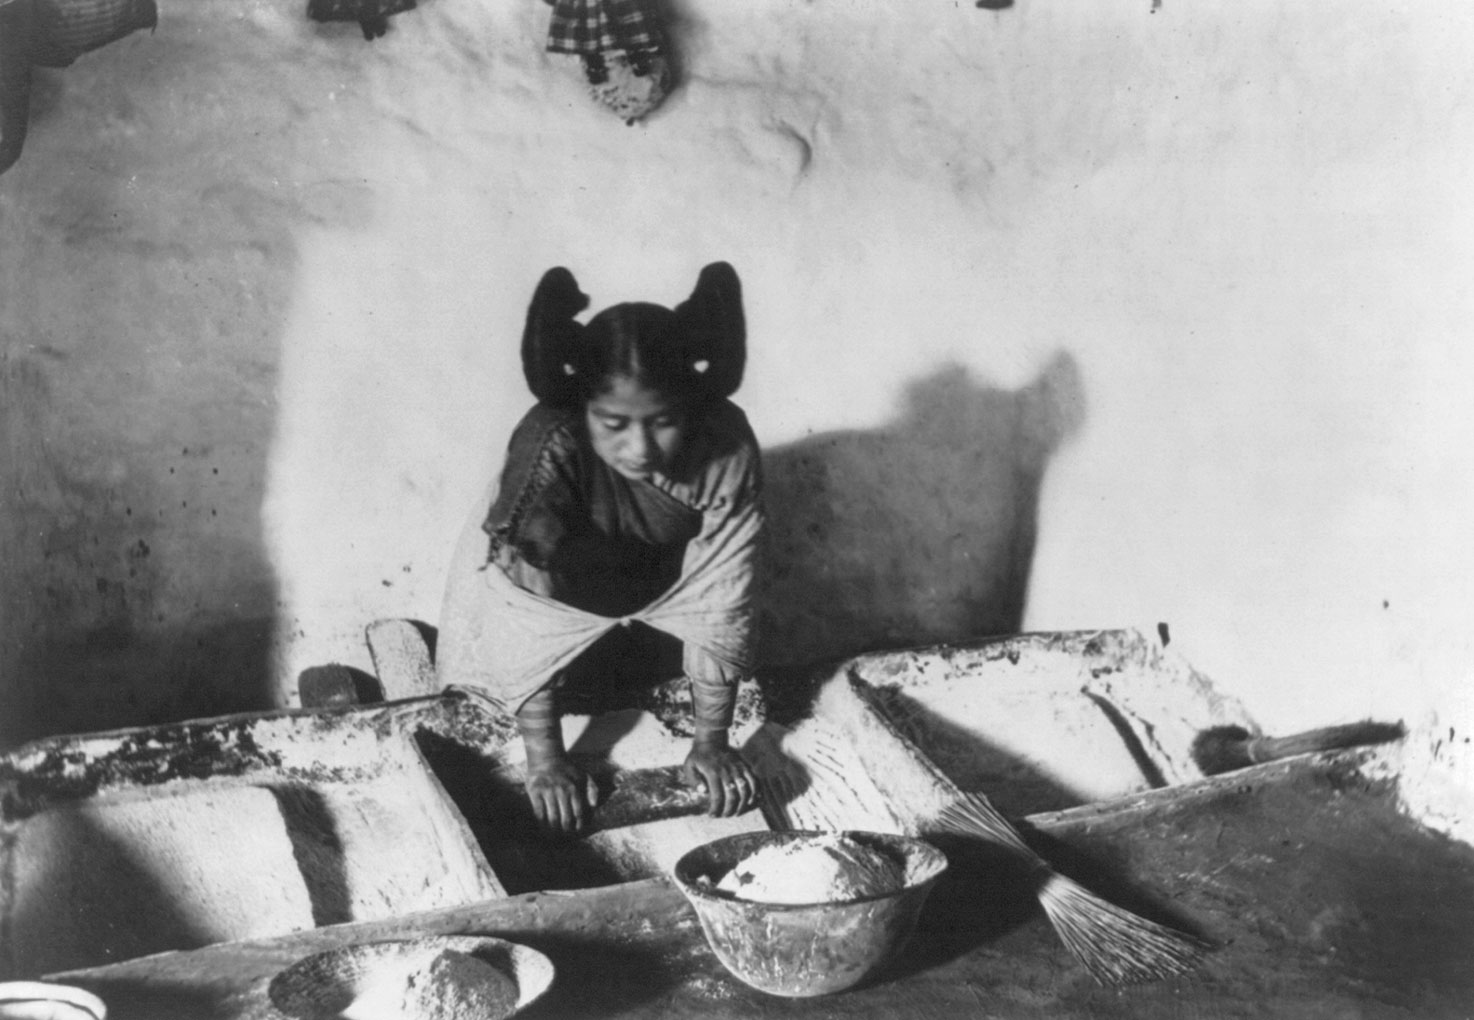 Black and white photo of a young Hopi woman grinding corn taken around 1909. The photo shows a young woman wearing a shirt or dress and a shawl. Her hair is in a squash-blossom hairstyle, with one bun on each side of her head. She is using both hands to press down on an oval stone, using it to grind maize. In front of her sit bowls of maize flour and a whisk broom.